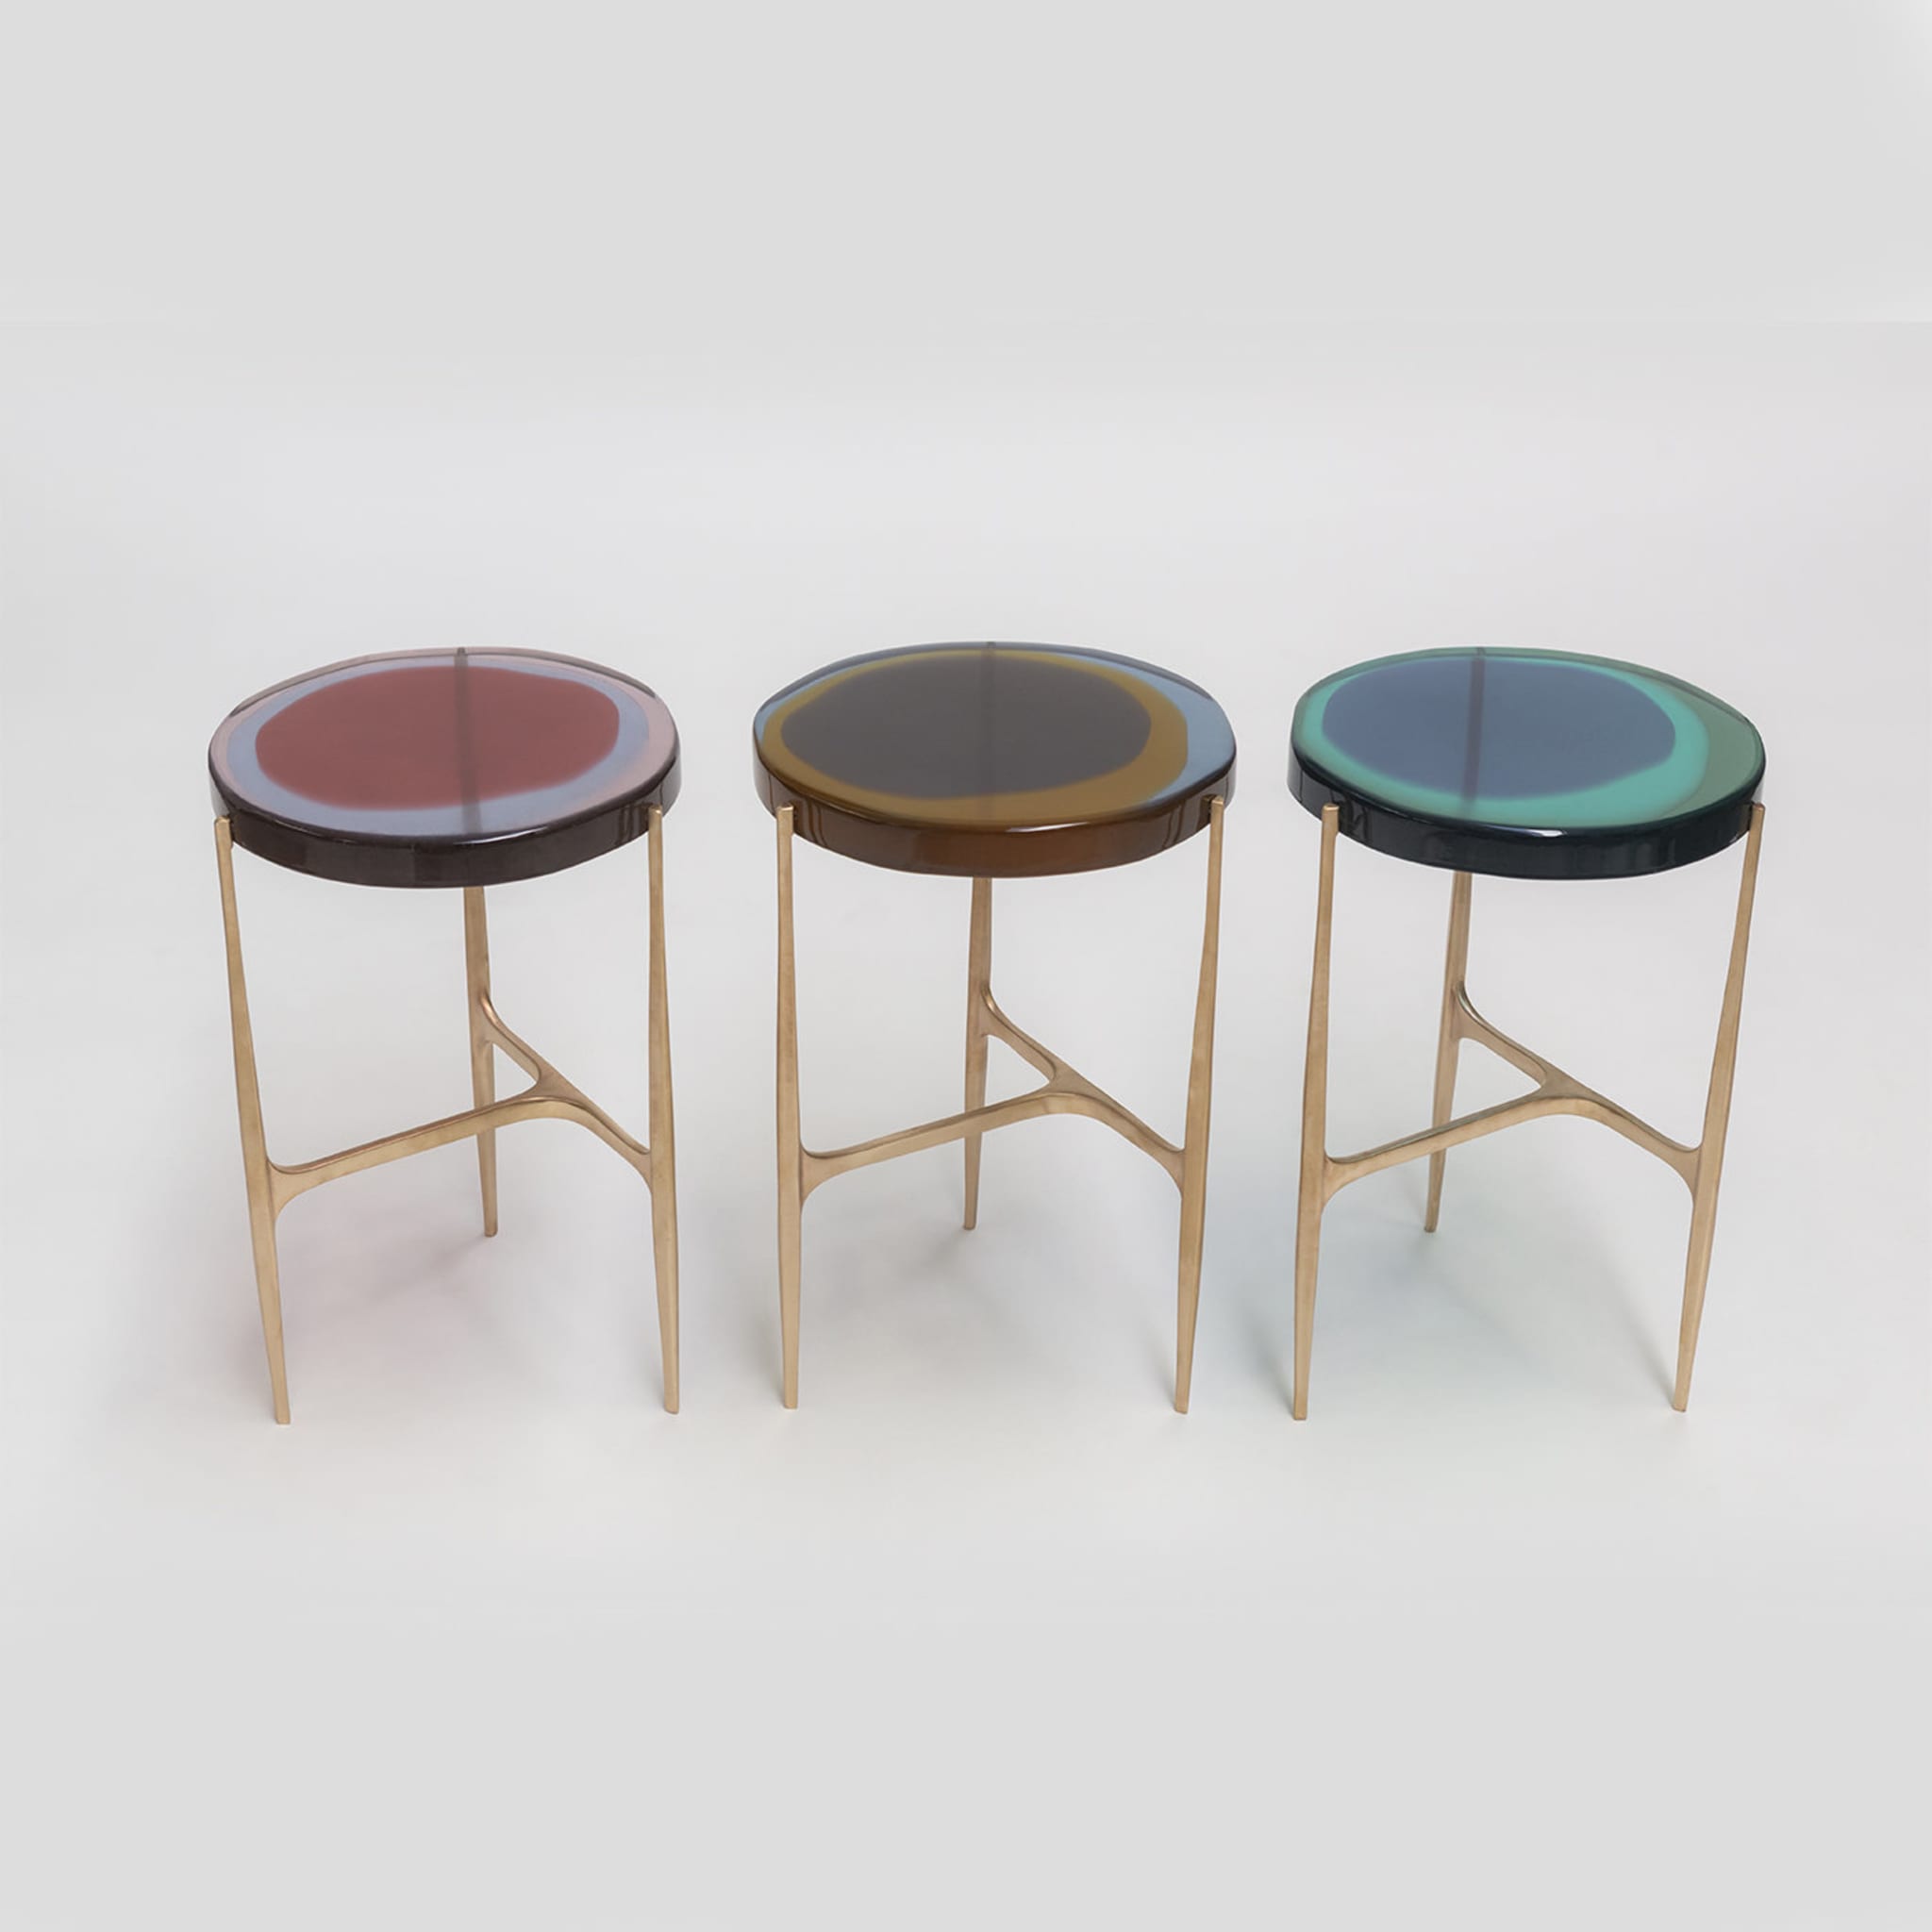 Agatha Modern Bronze Resin Low Side Table Turquoise - Alternative view 3